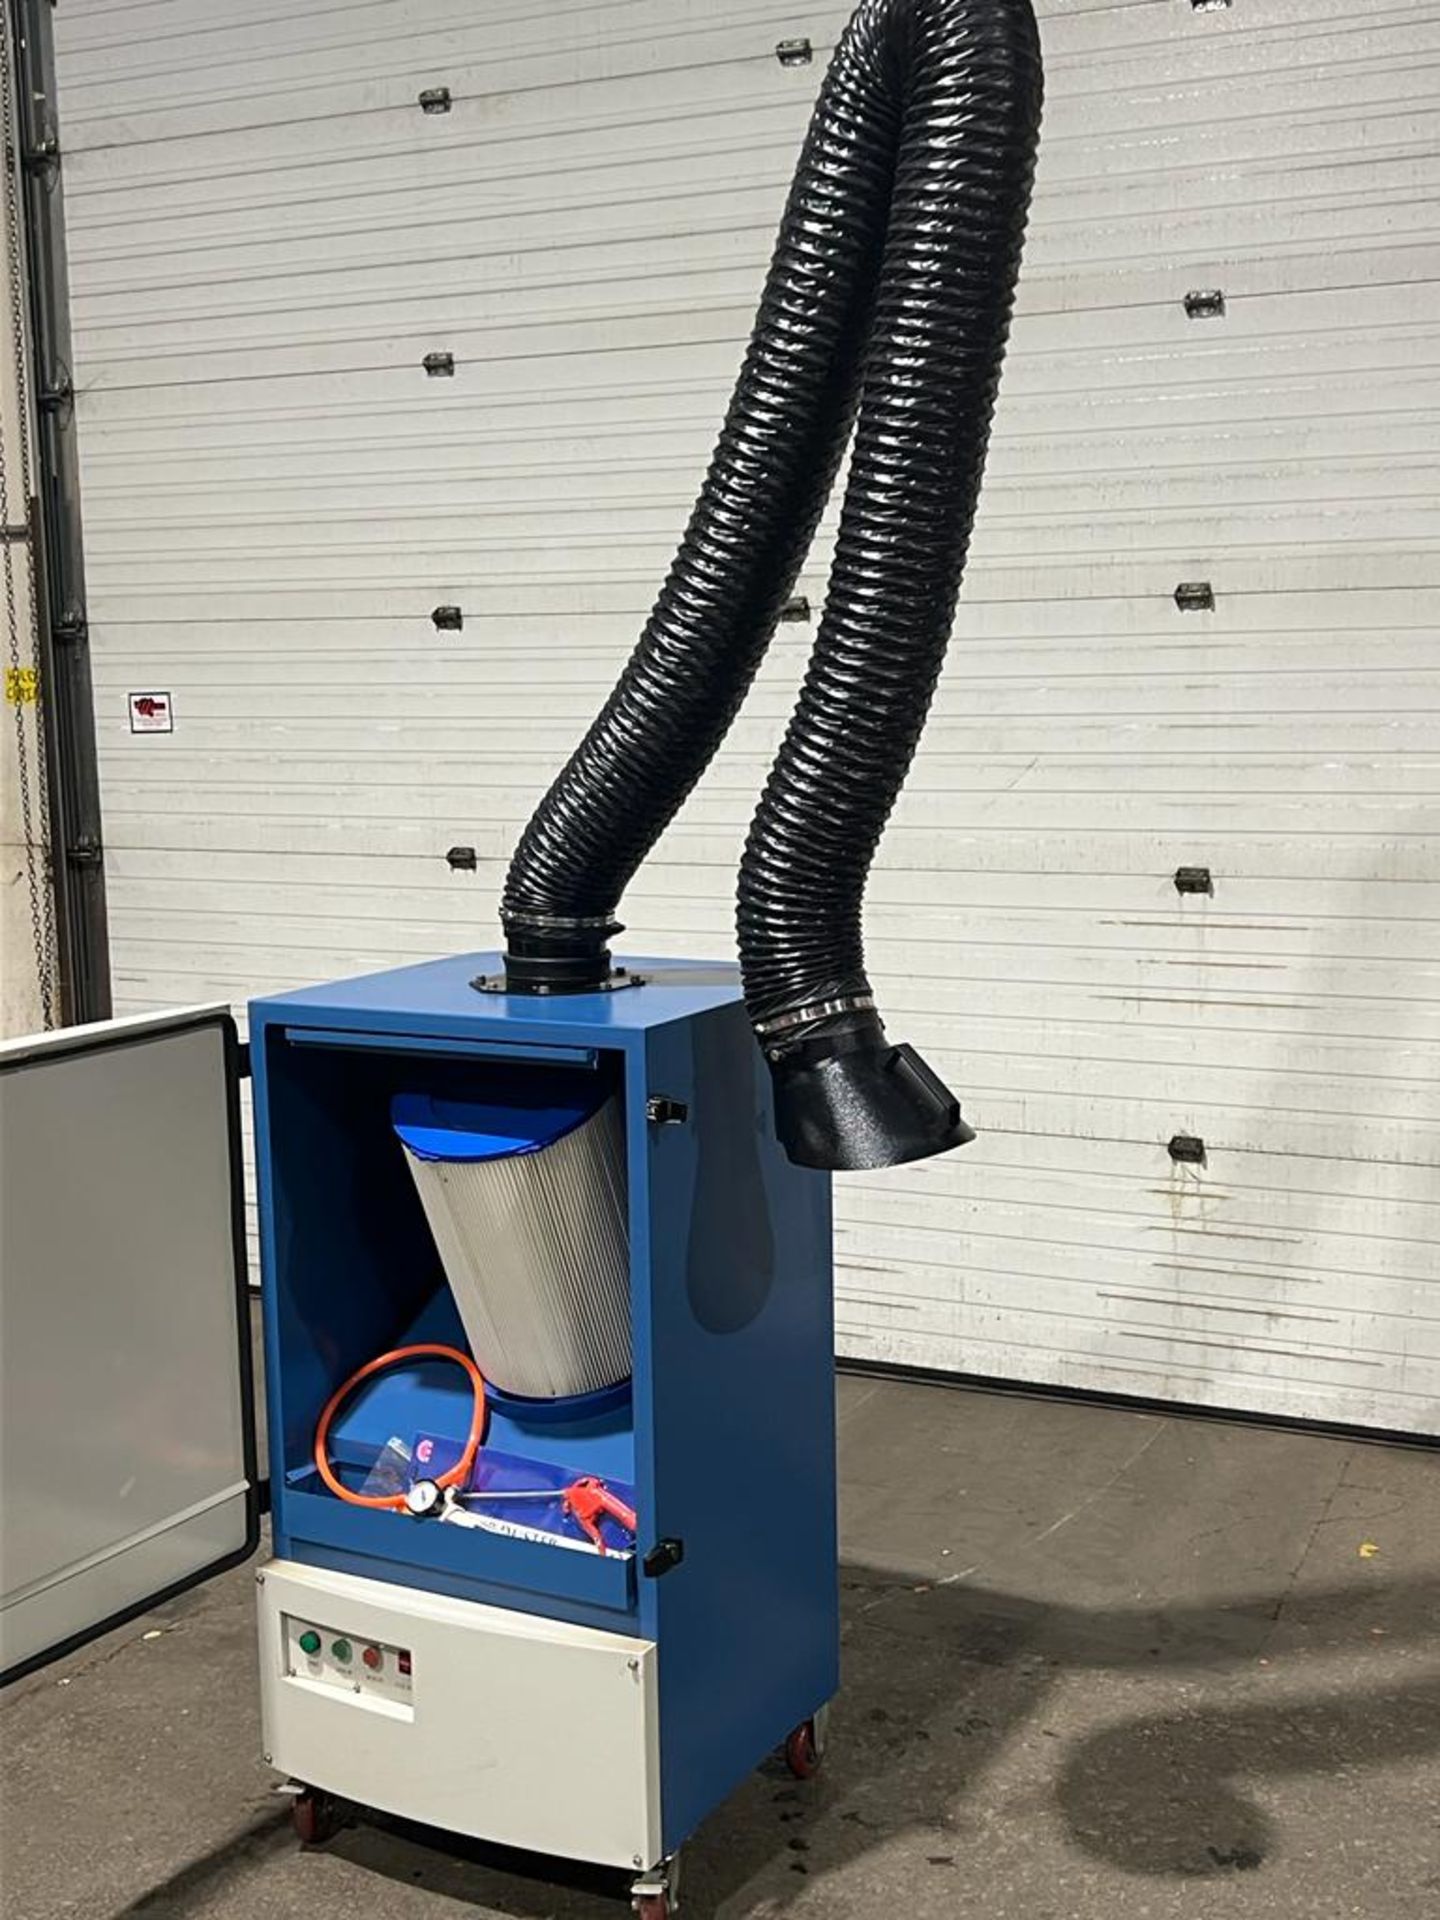 NEW Pneu-Airtec Fume Extractor with MINT long reach snorkel arm - 120V single phase - MINT & - Image 2 of 3